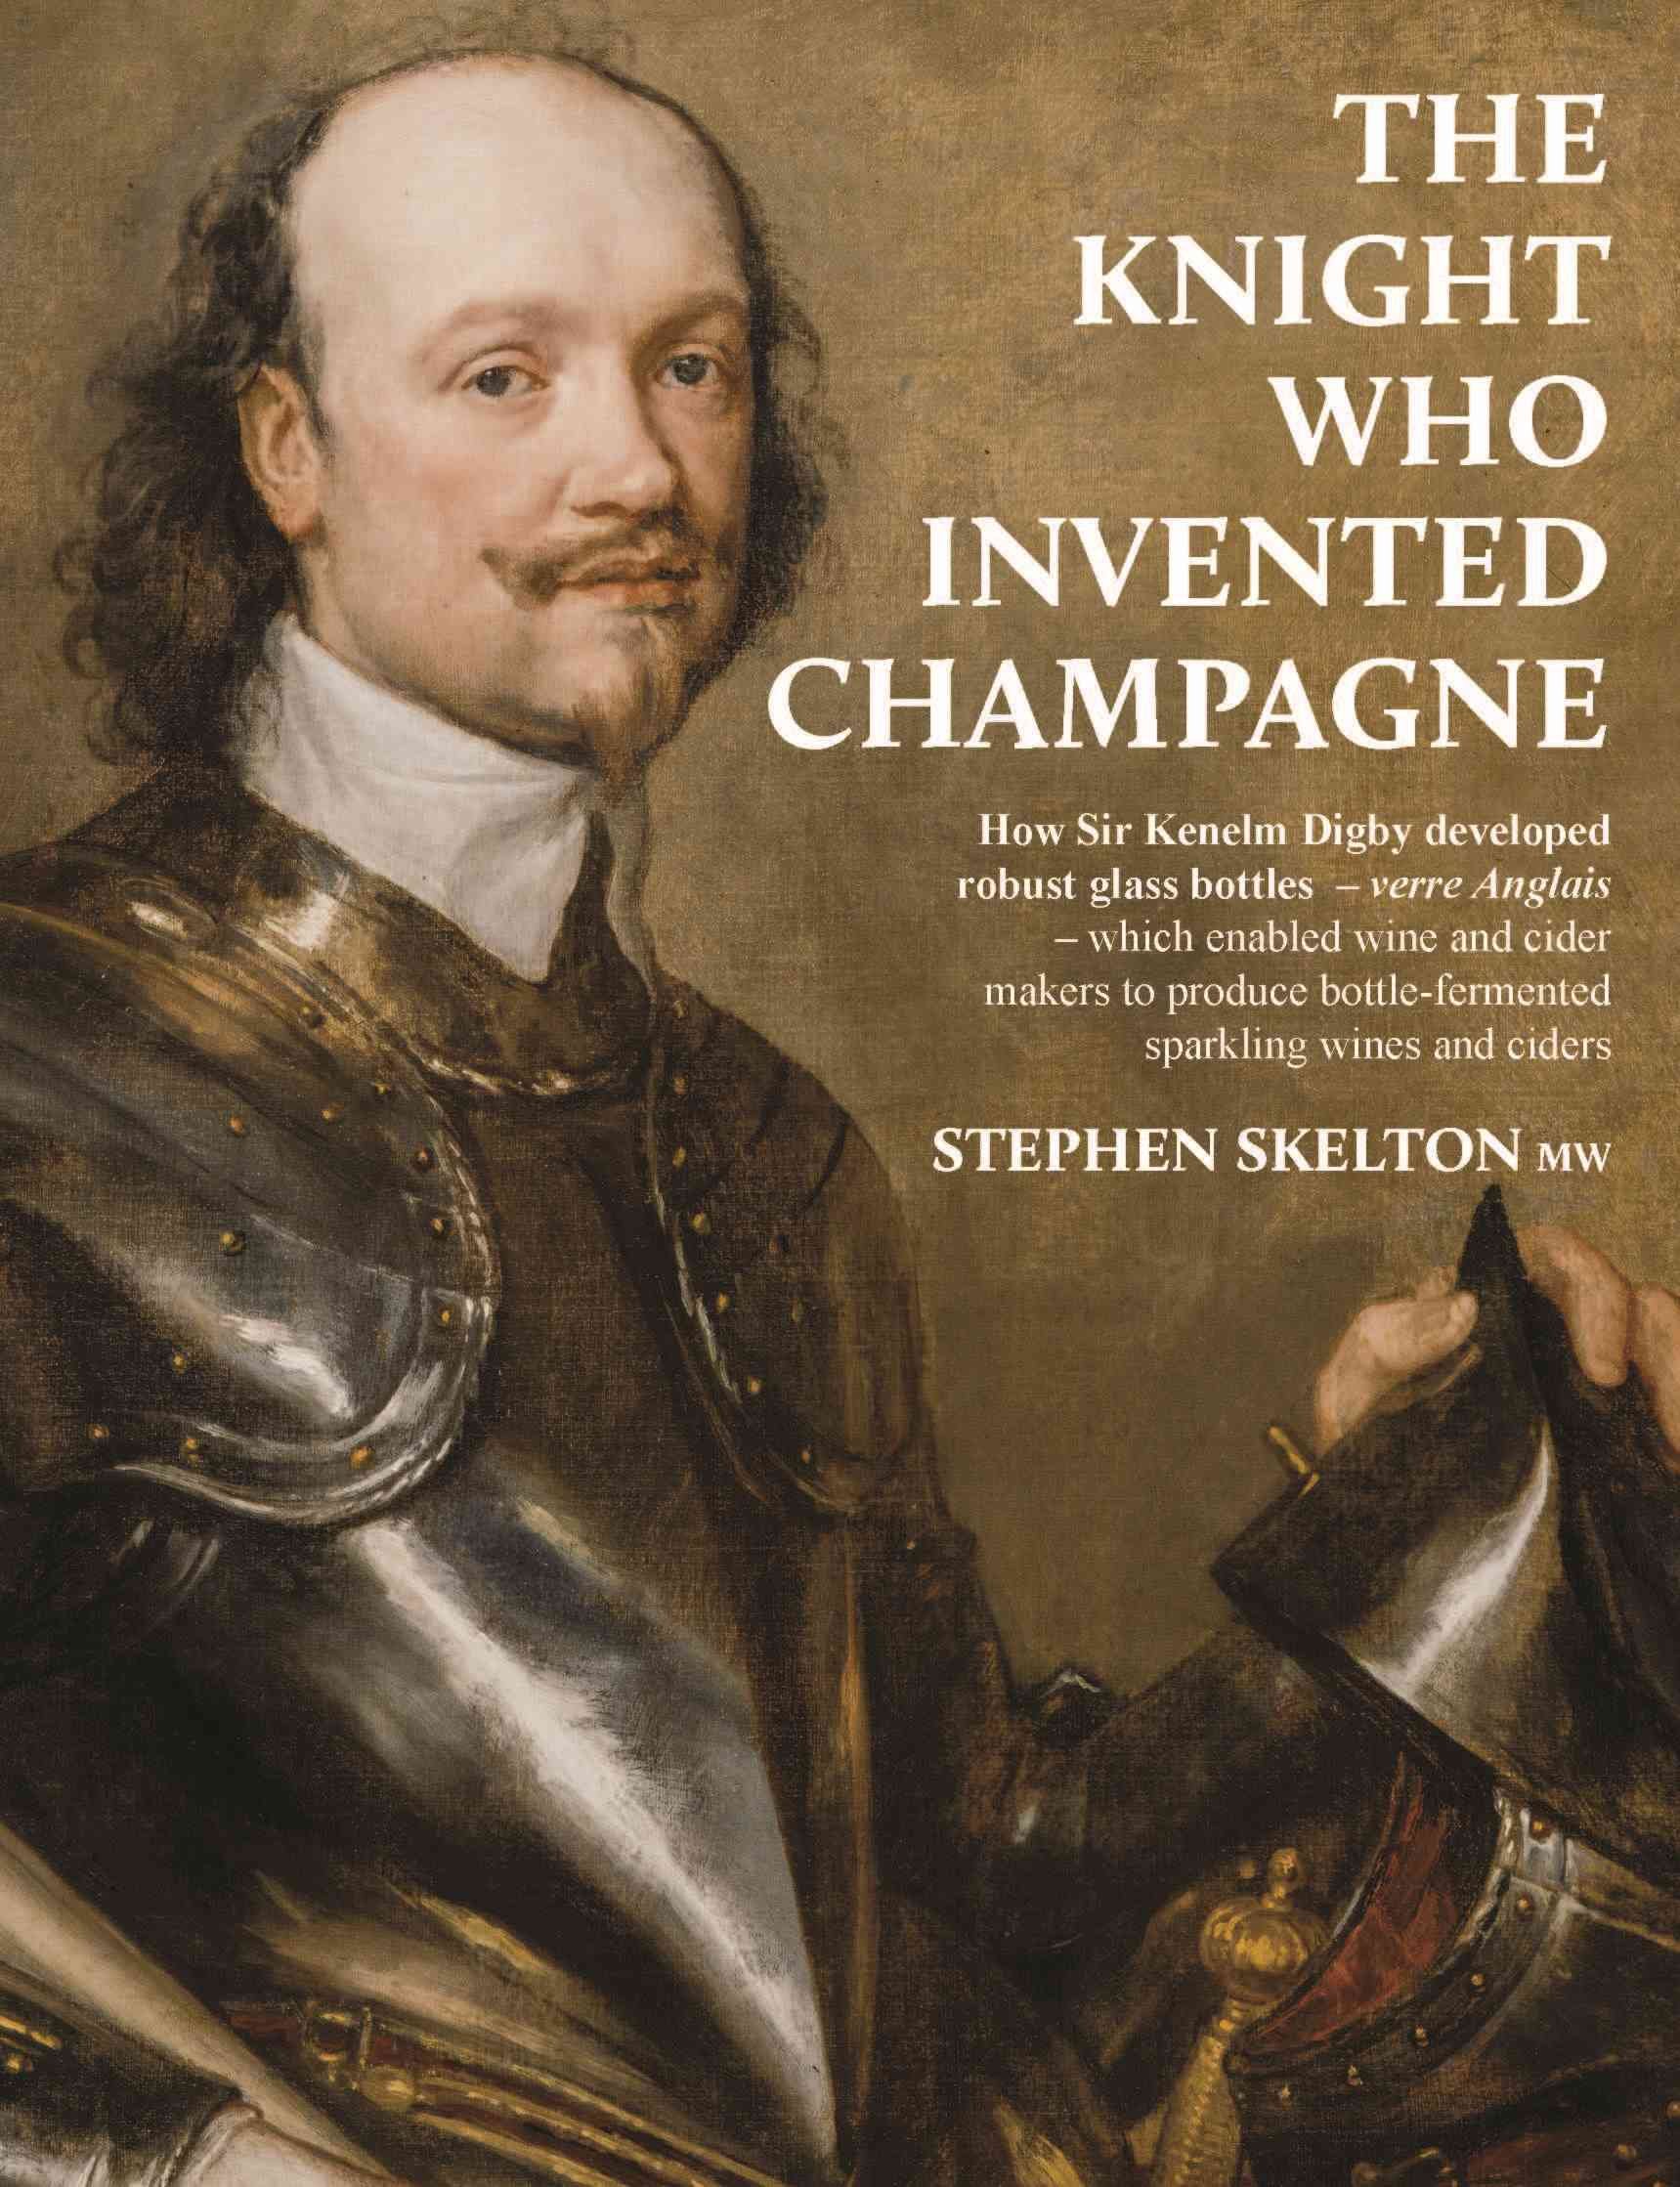 The Knight Who Invented Champagne by Stephen Skelton MW